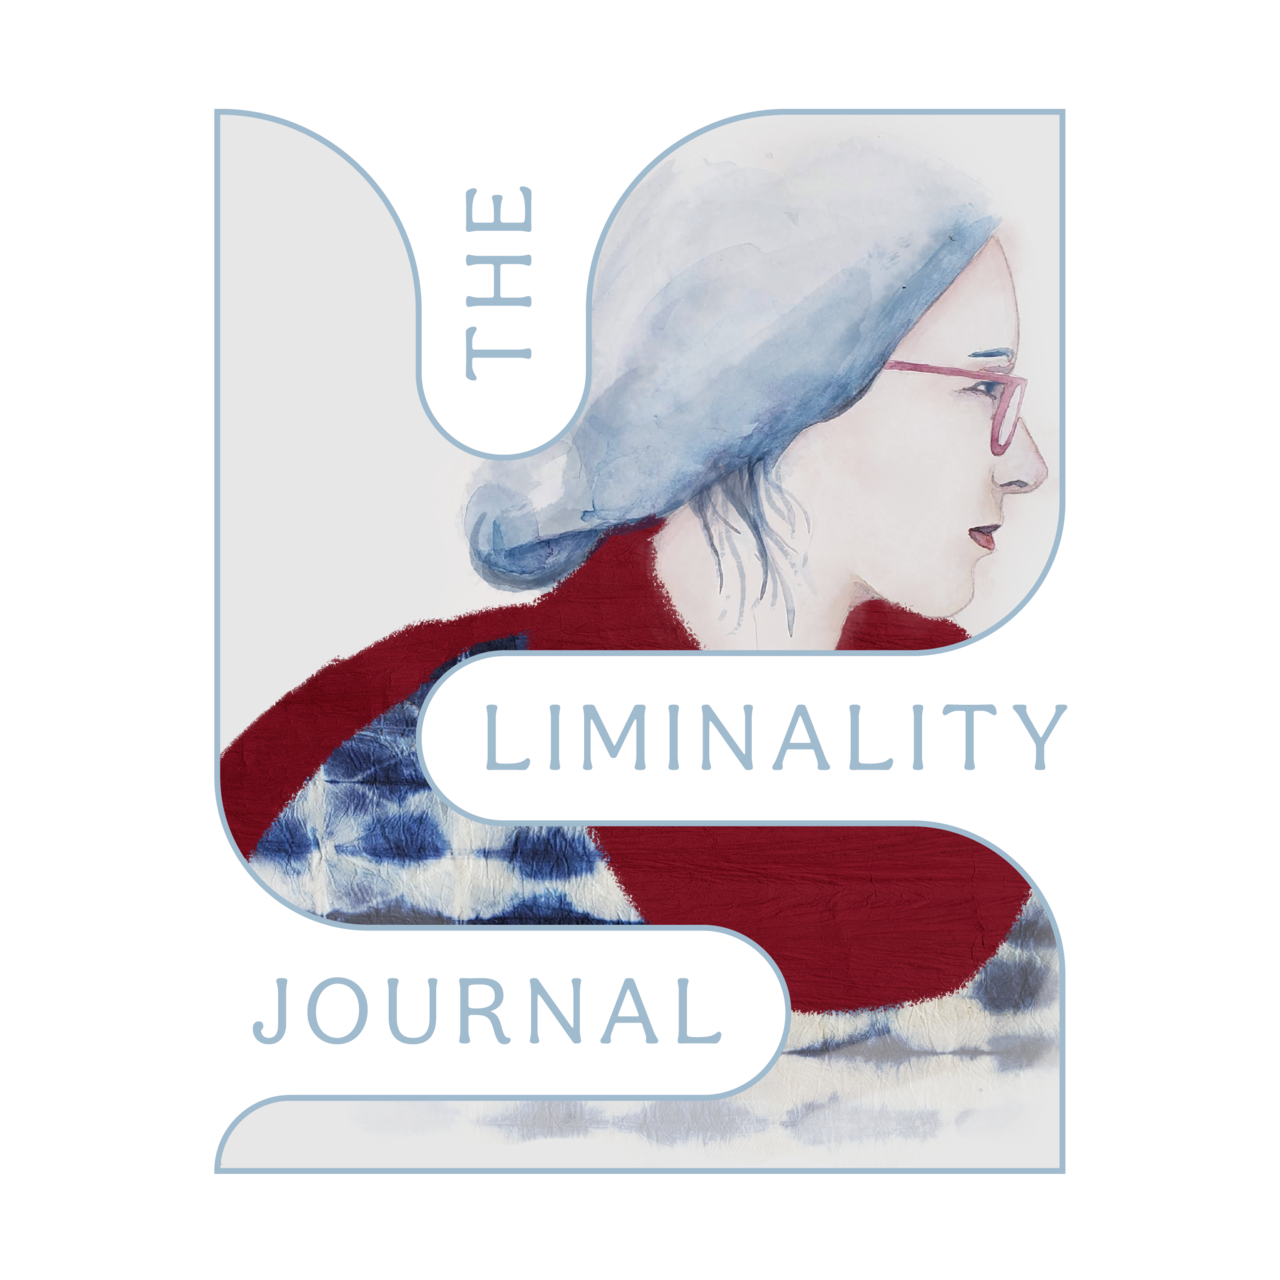 The Liminality Journal